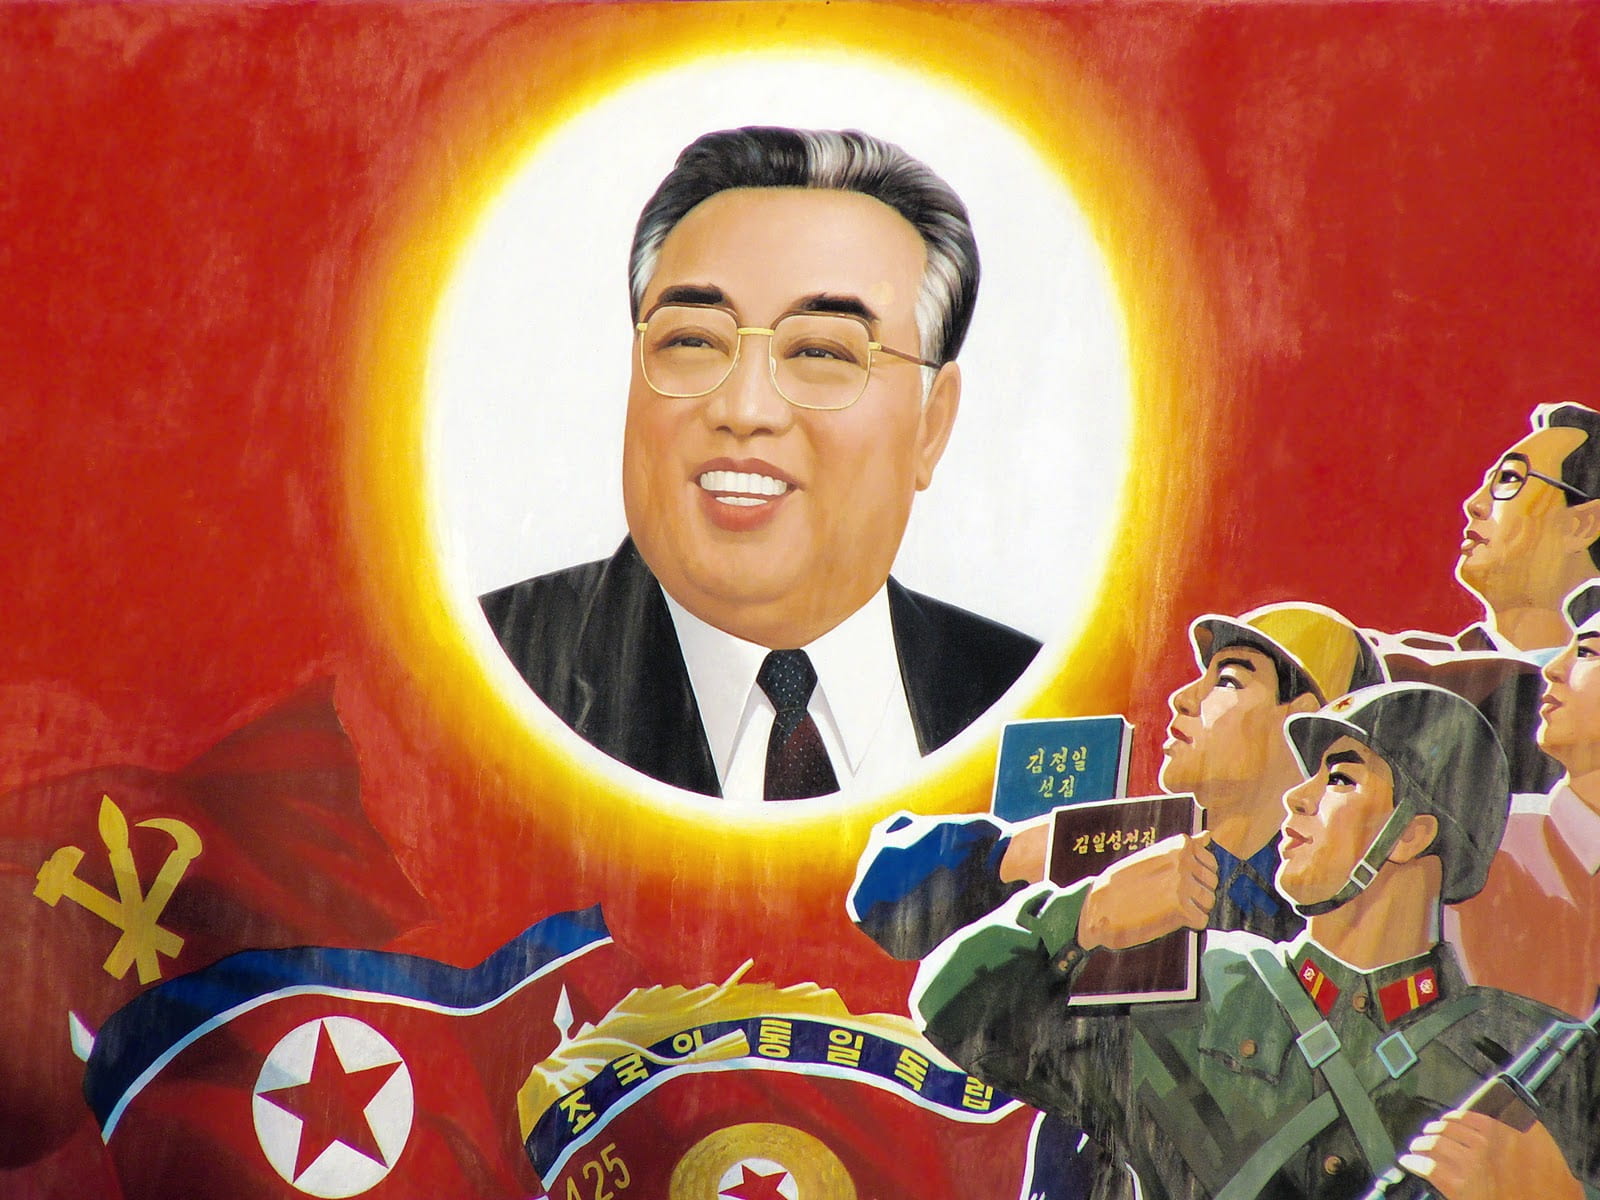 A painting with a smiling Kim Il-Sung in the center surrounded by a yellow glowing halo. In the right bottom corner, there are four Korean citizens, one of whom dressed in military attire, another in construction equipment. They are holding books and saluting the portrait of Kim Il-Sung. In the left bottom corner are three waving flags: the Workers Party of Korea, the Democratic People’s Republic of Korea, and the Korean People’s Army.